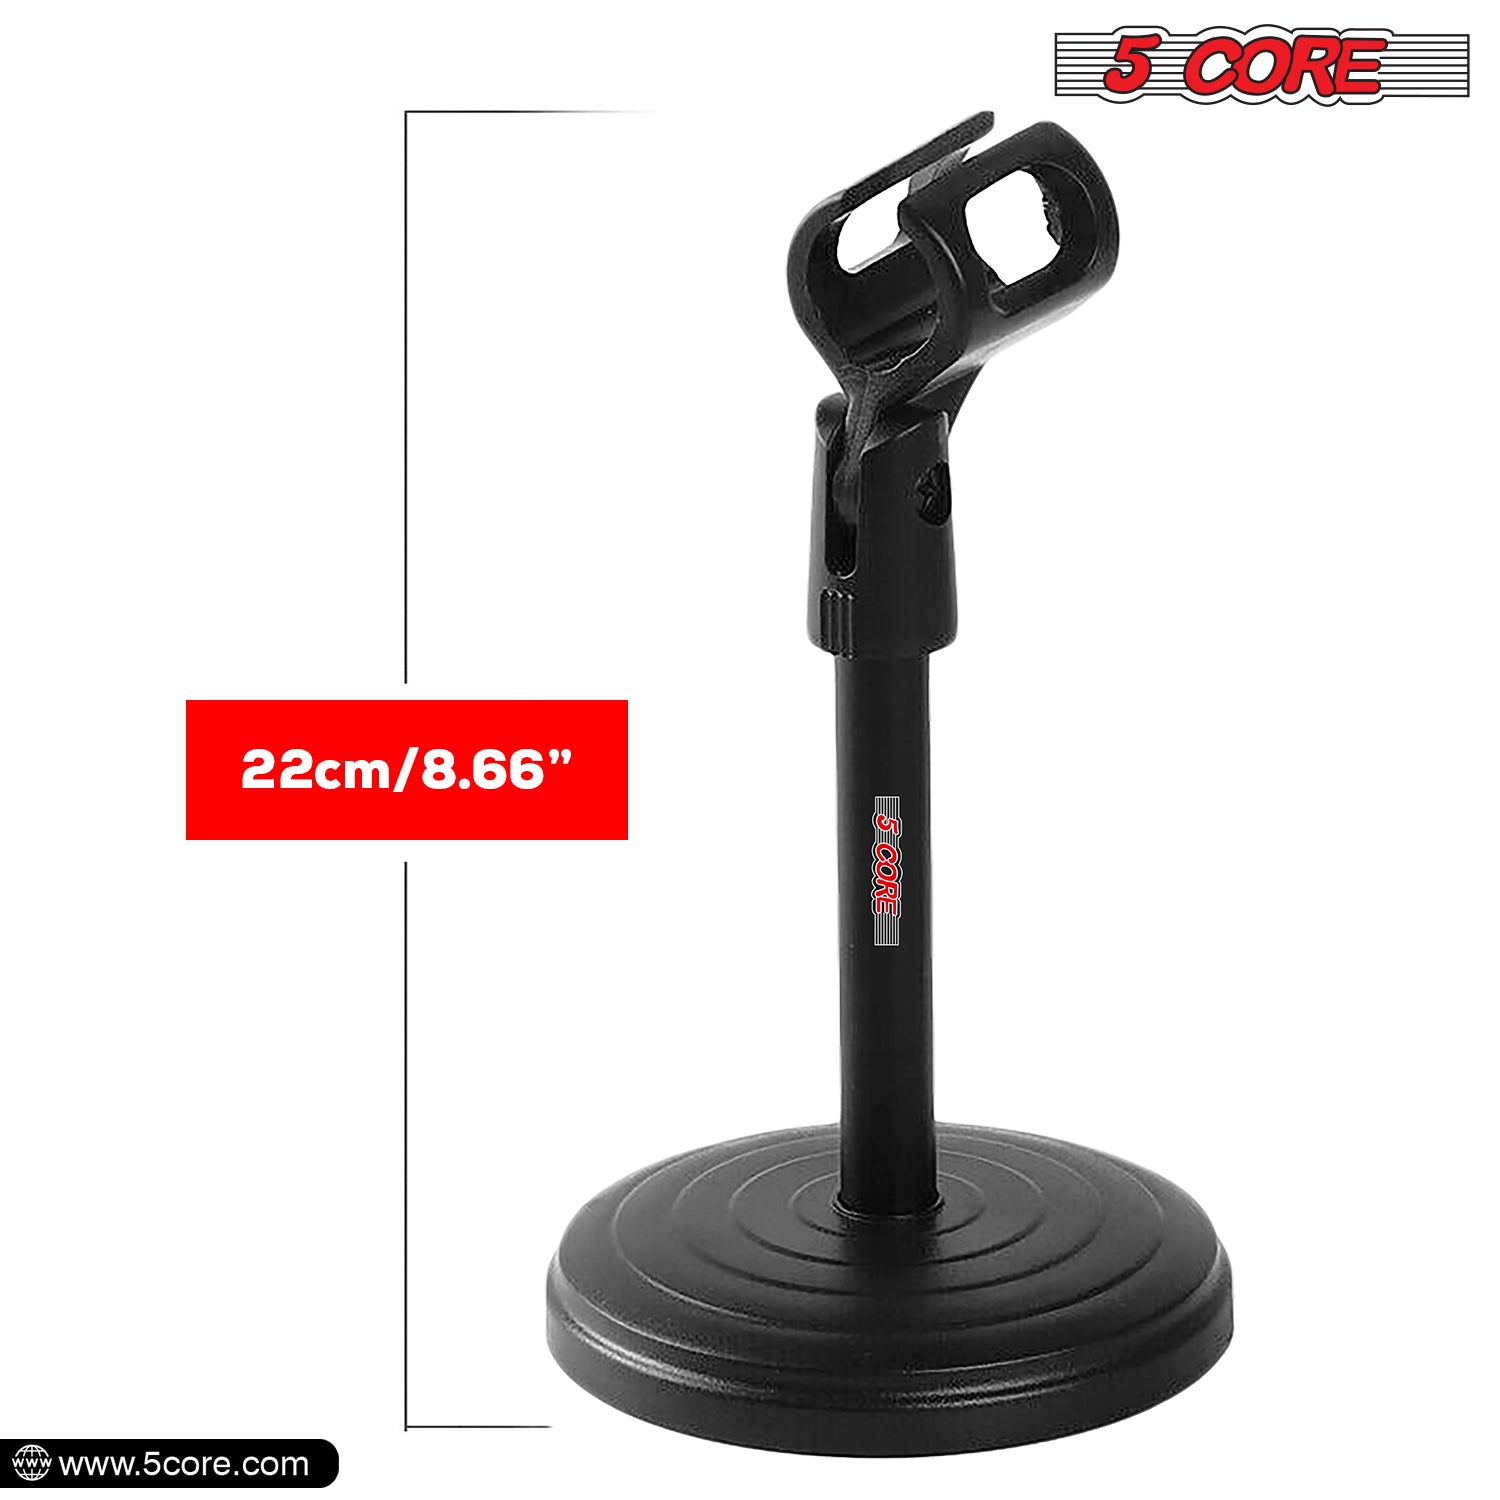 5 Core Round Base Mic Stand Desk Universal Desktop Adjustable Table Top Microphone Stand w Mic CLip 1/2 pc